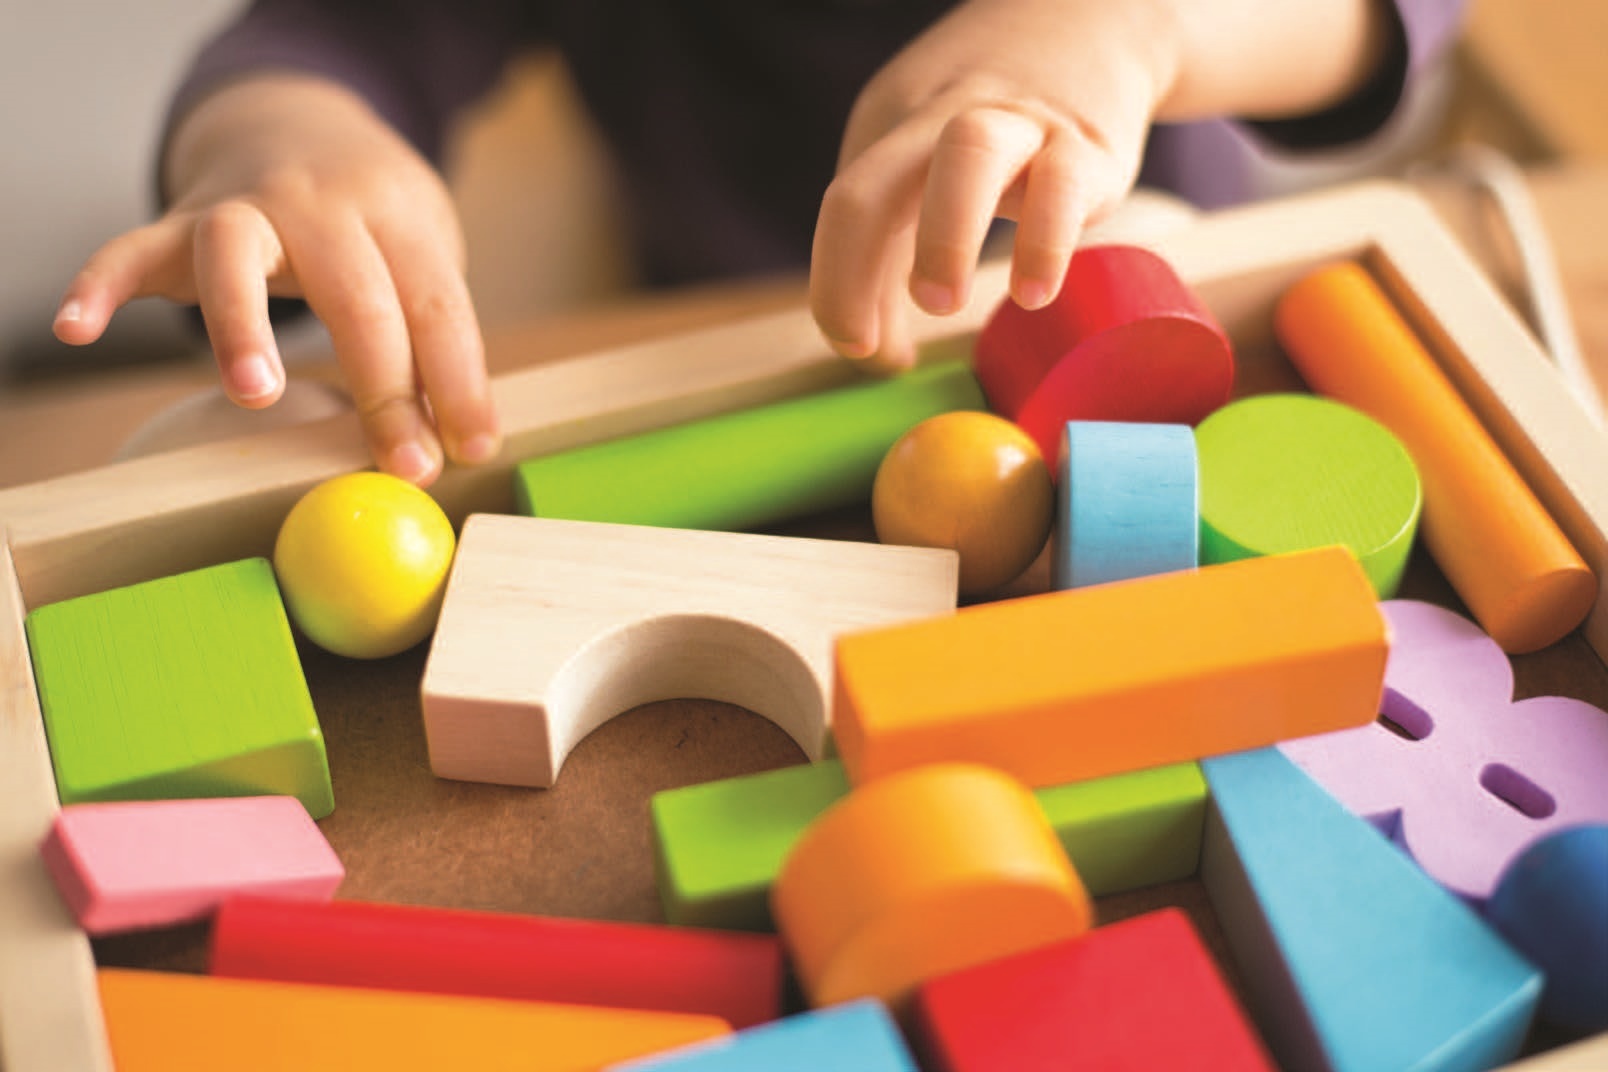 toddlers hands playing wooden blocks